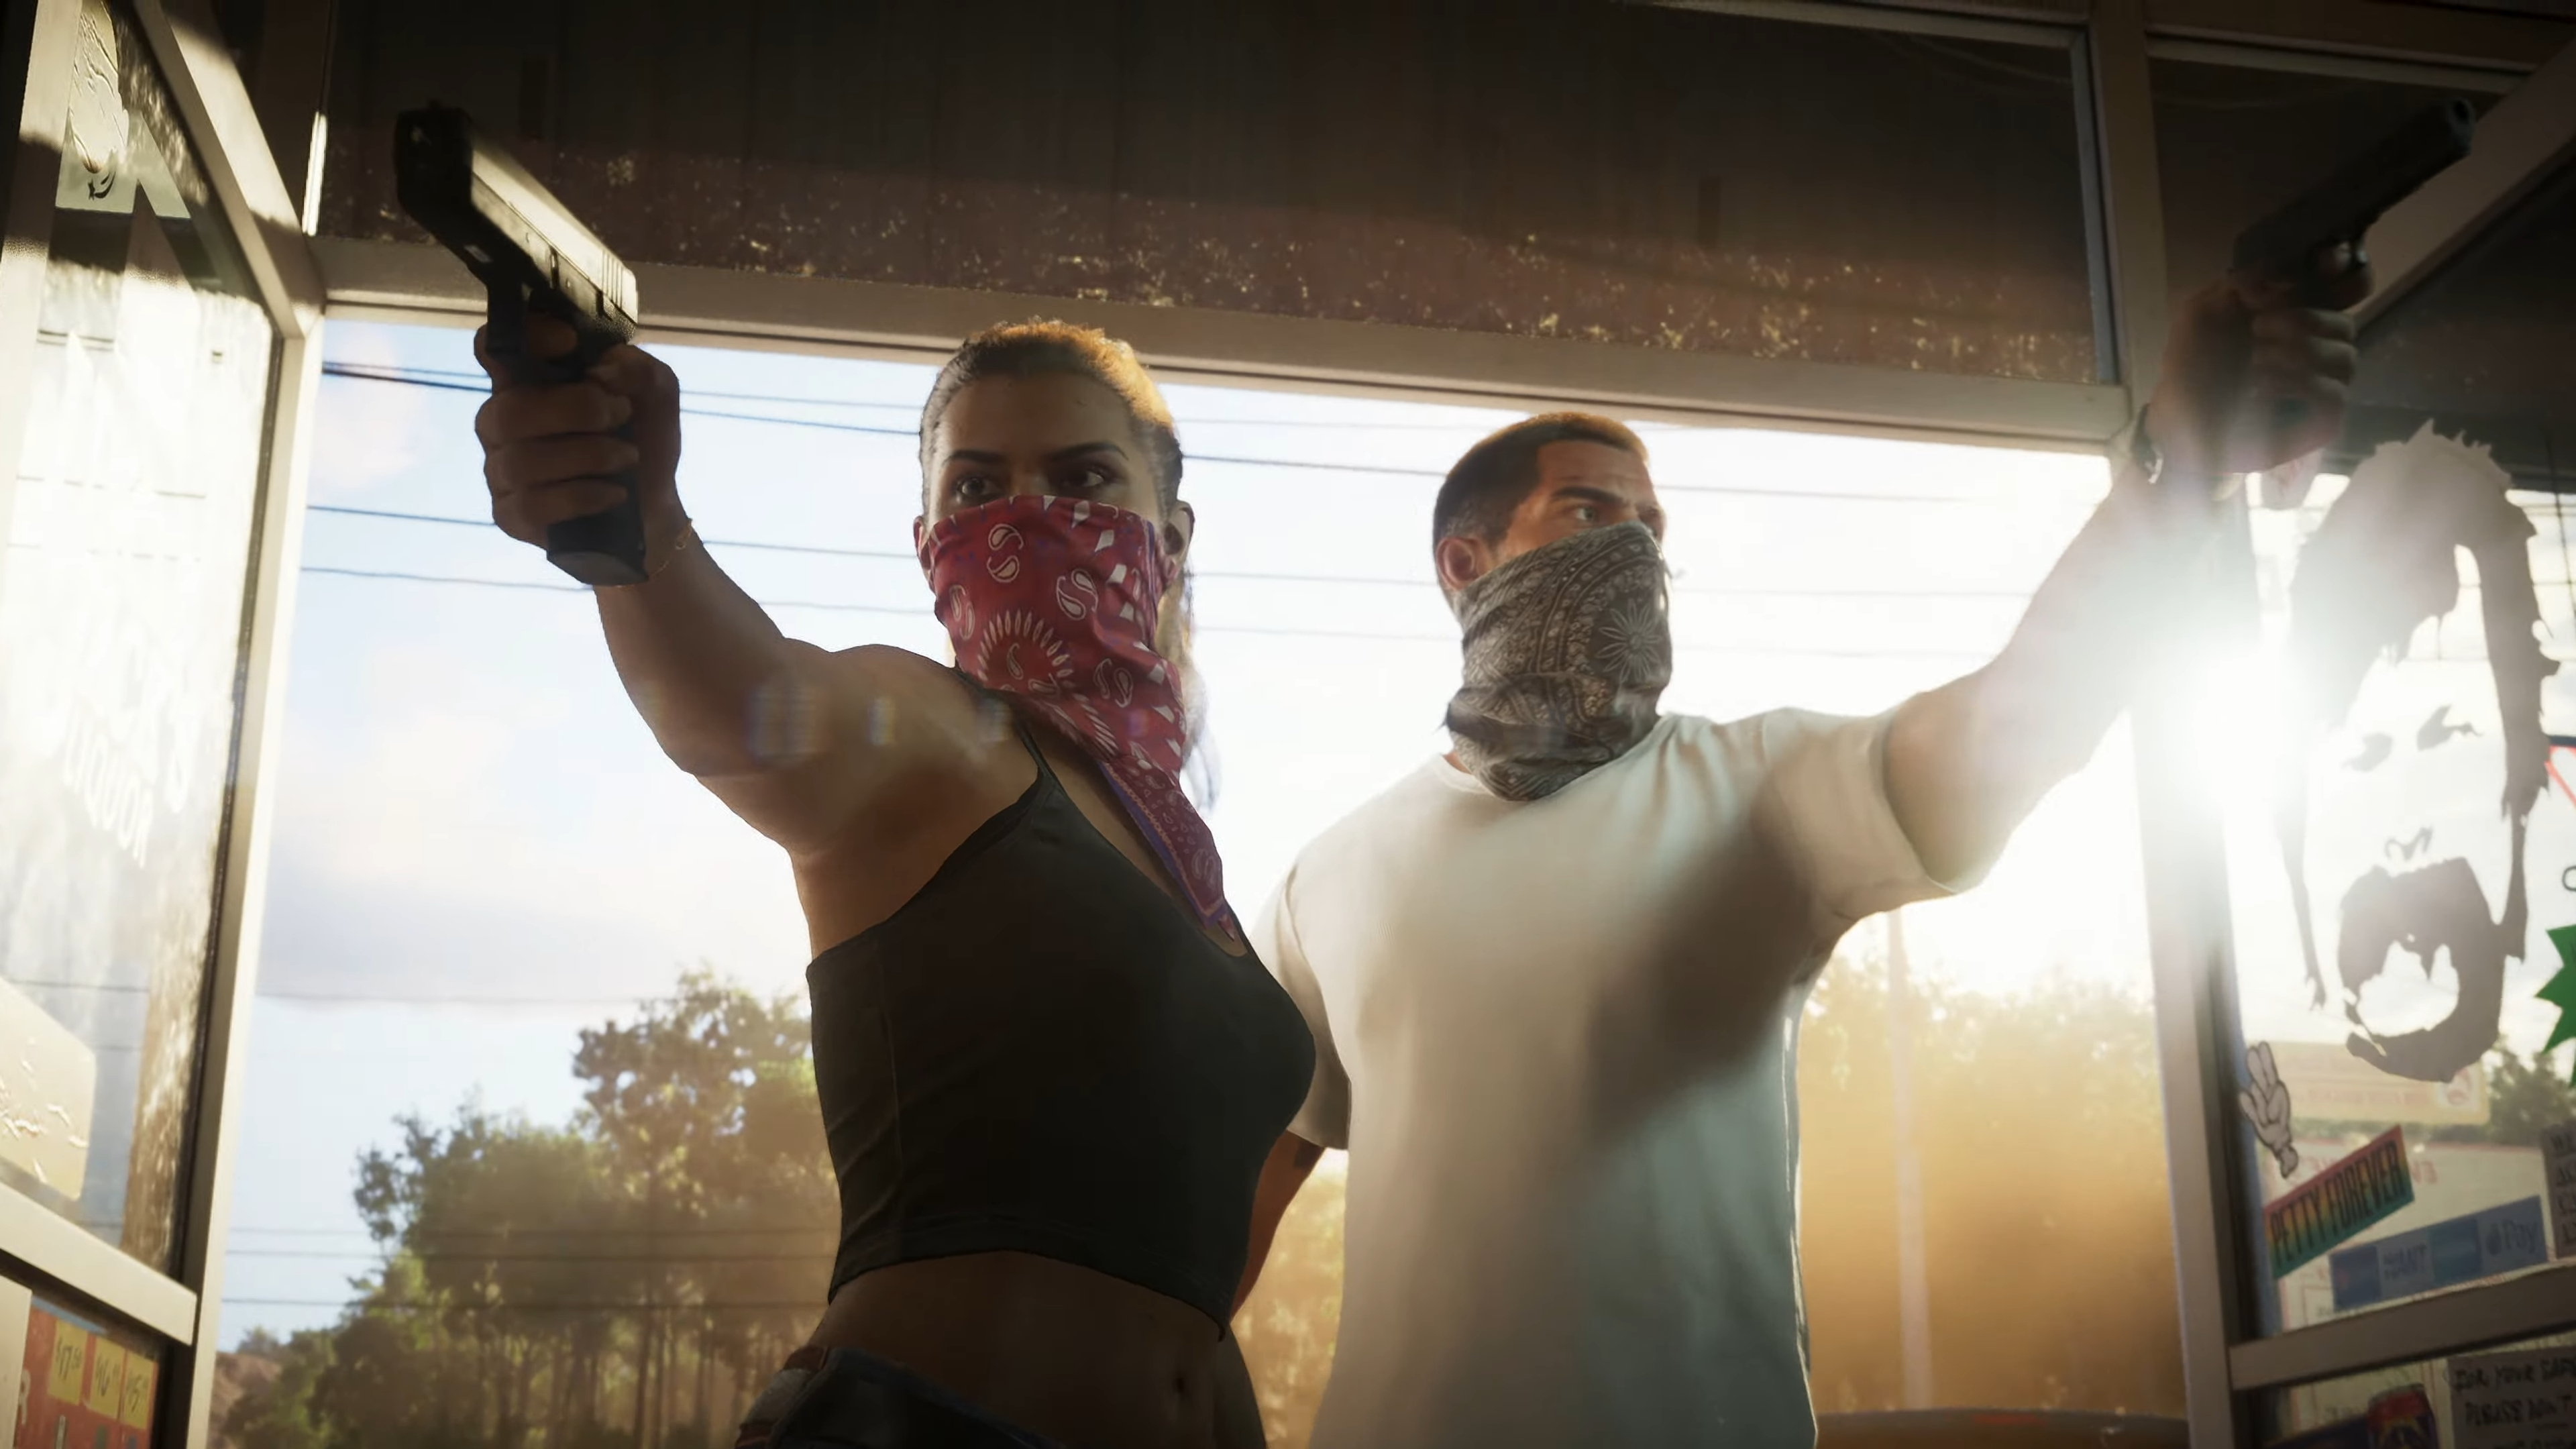 Weekly gaming news round-up: GTA VI trailer, The Game Awards, The